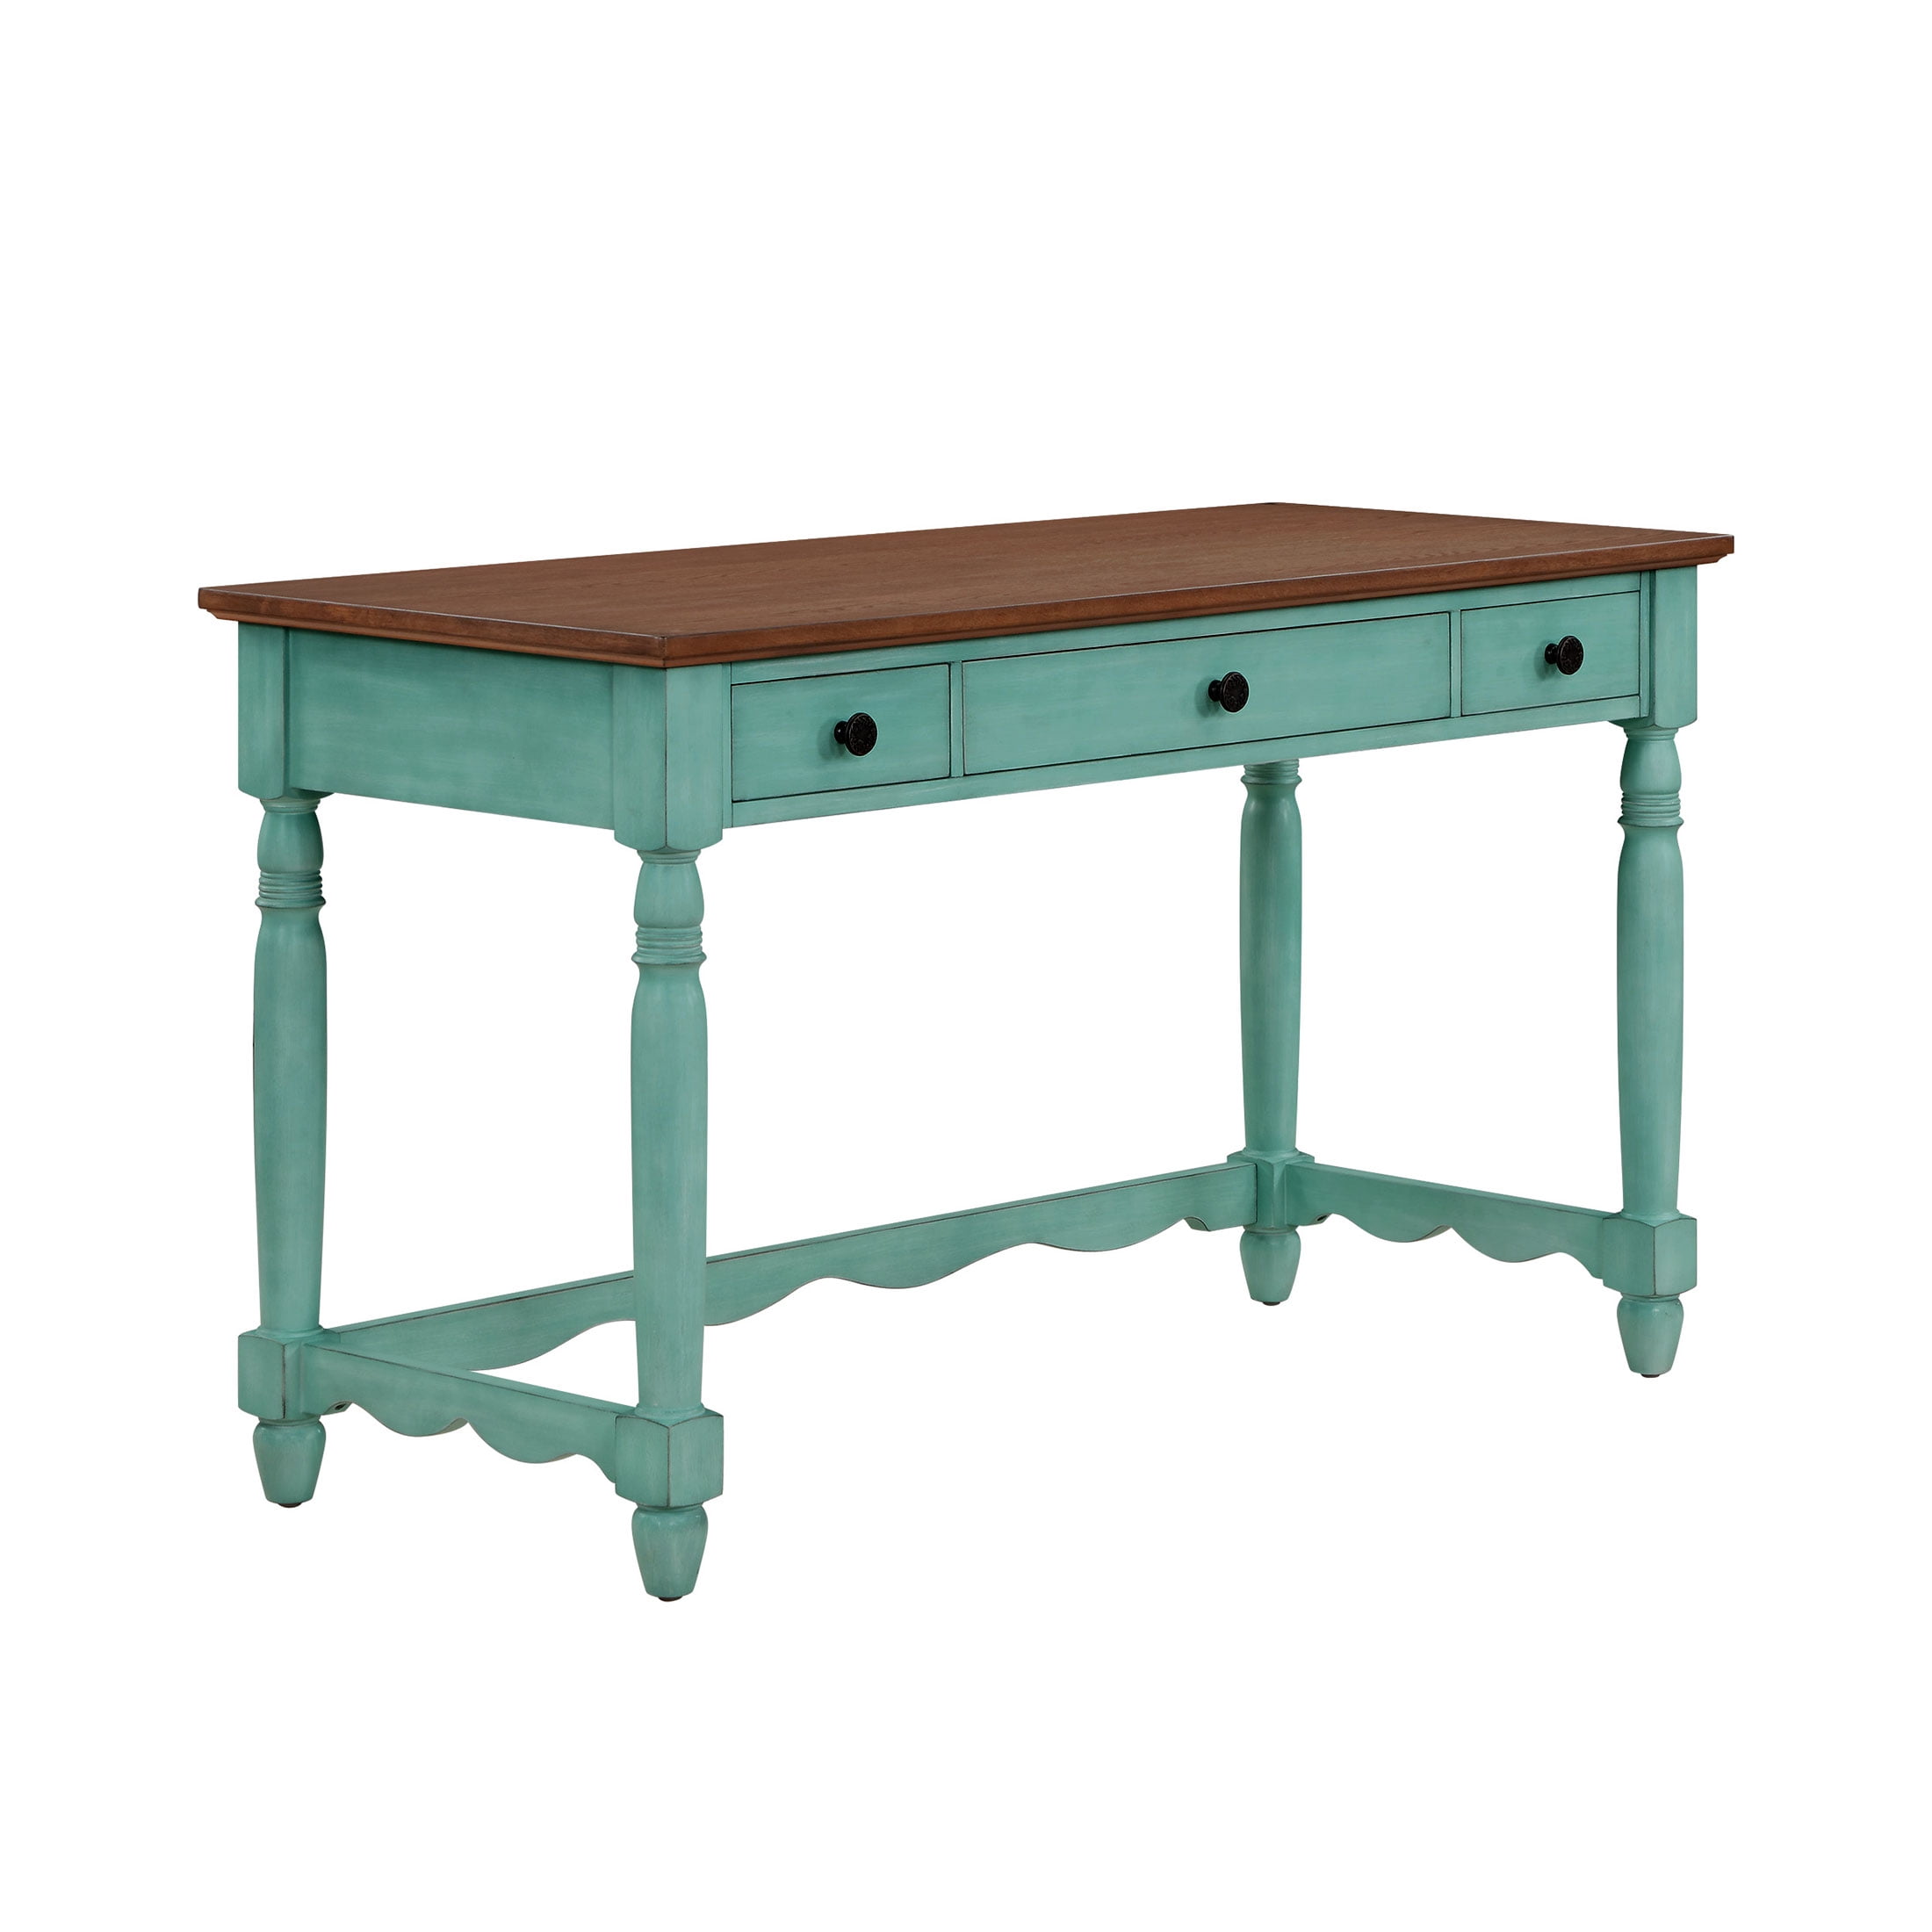 The Pioneer Woman Writing Desk Made With Solid Wood Frame, Teal